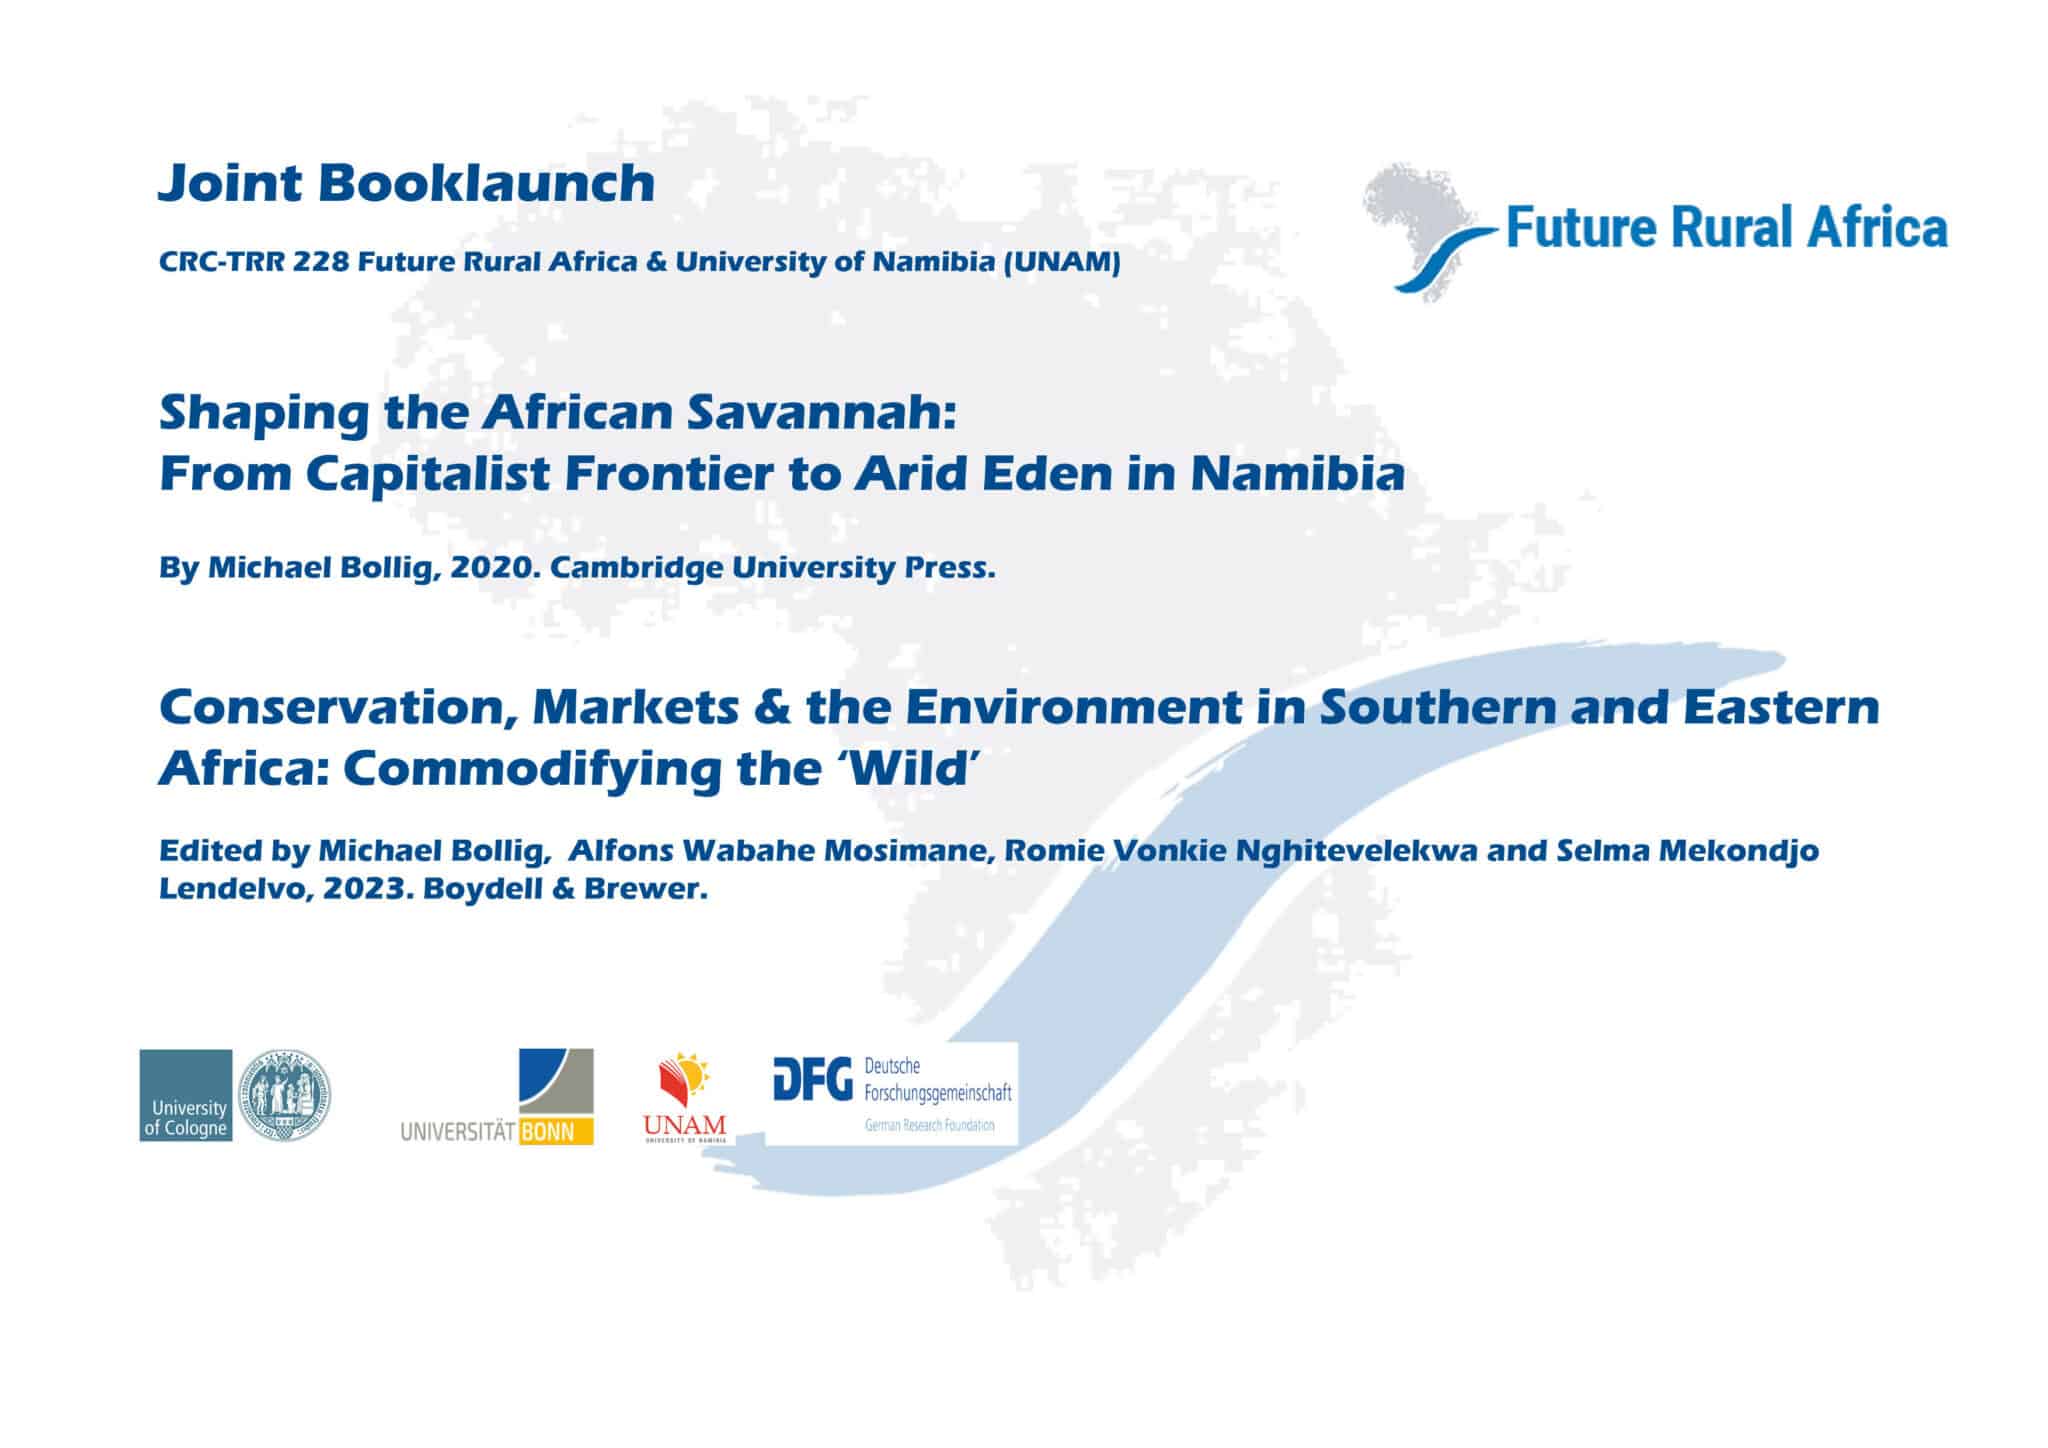 poster announcing a joint crc & unam book launch